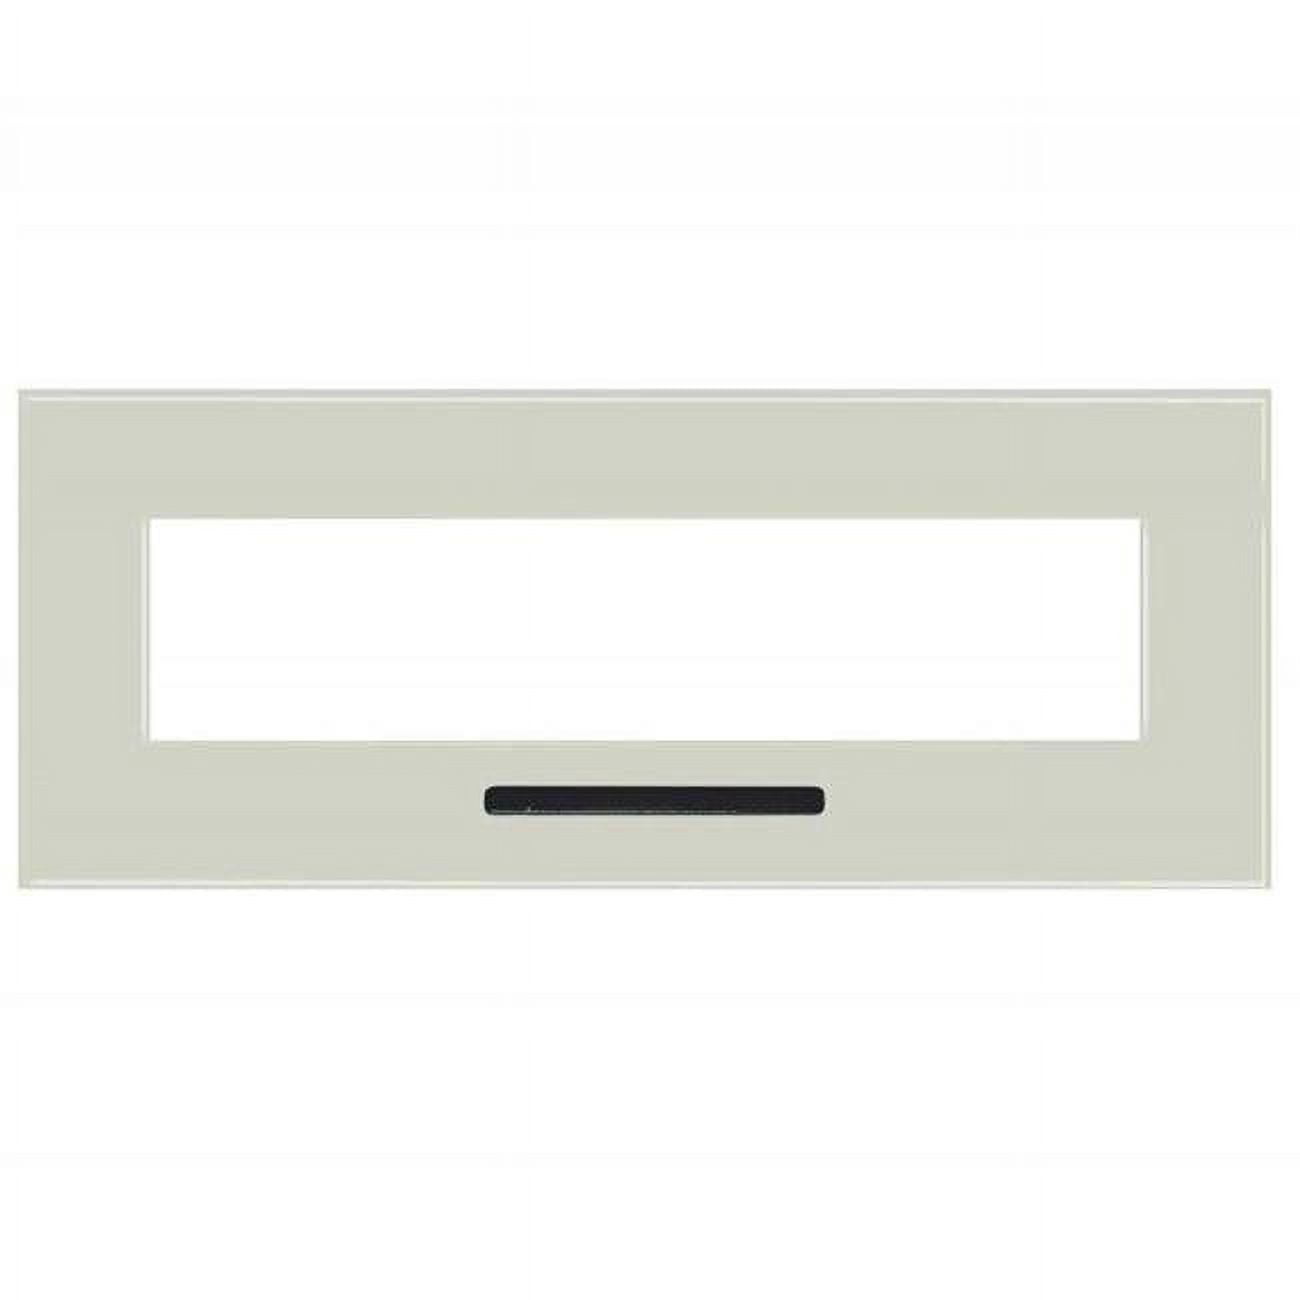 10701208b 100 X 23 In. White Glass Surround For Wm10023flu Fireplace Inserts